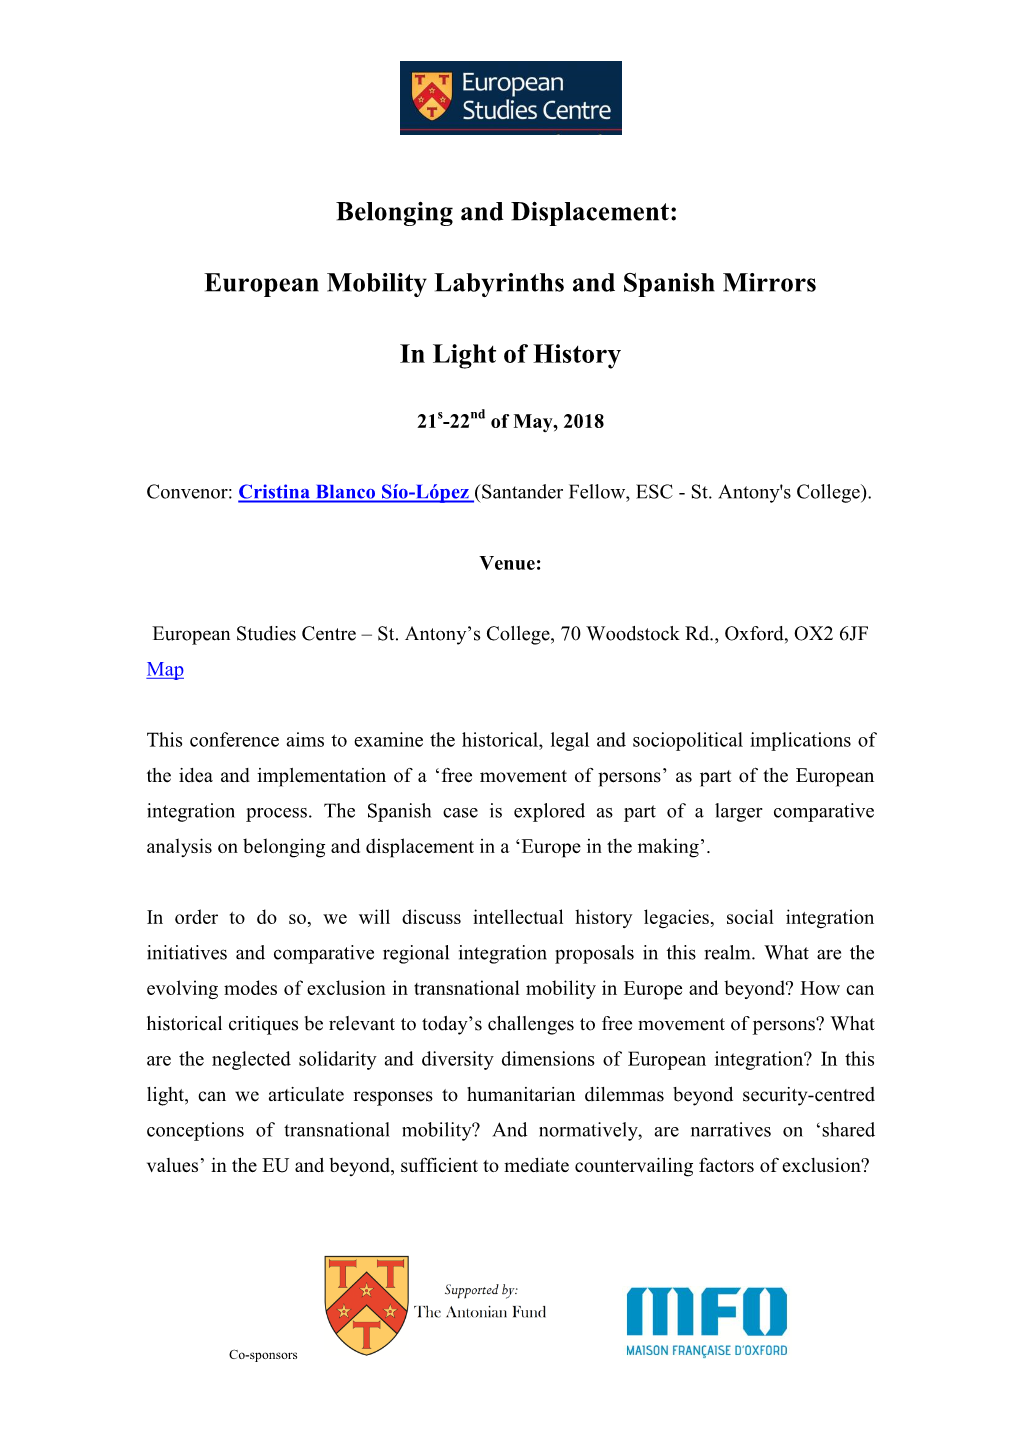 European Mobility Labyrinths and Spanish Mirrors in Light of History